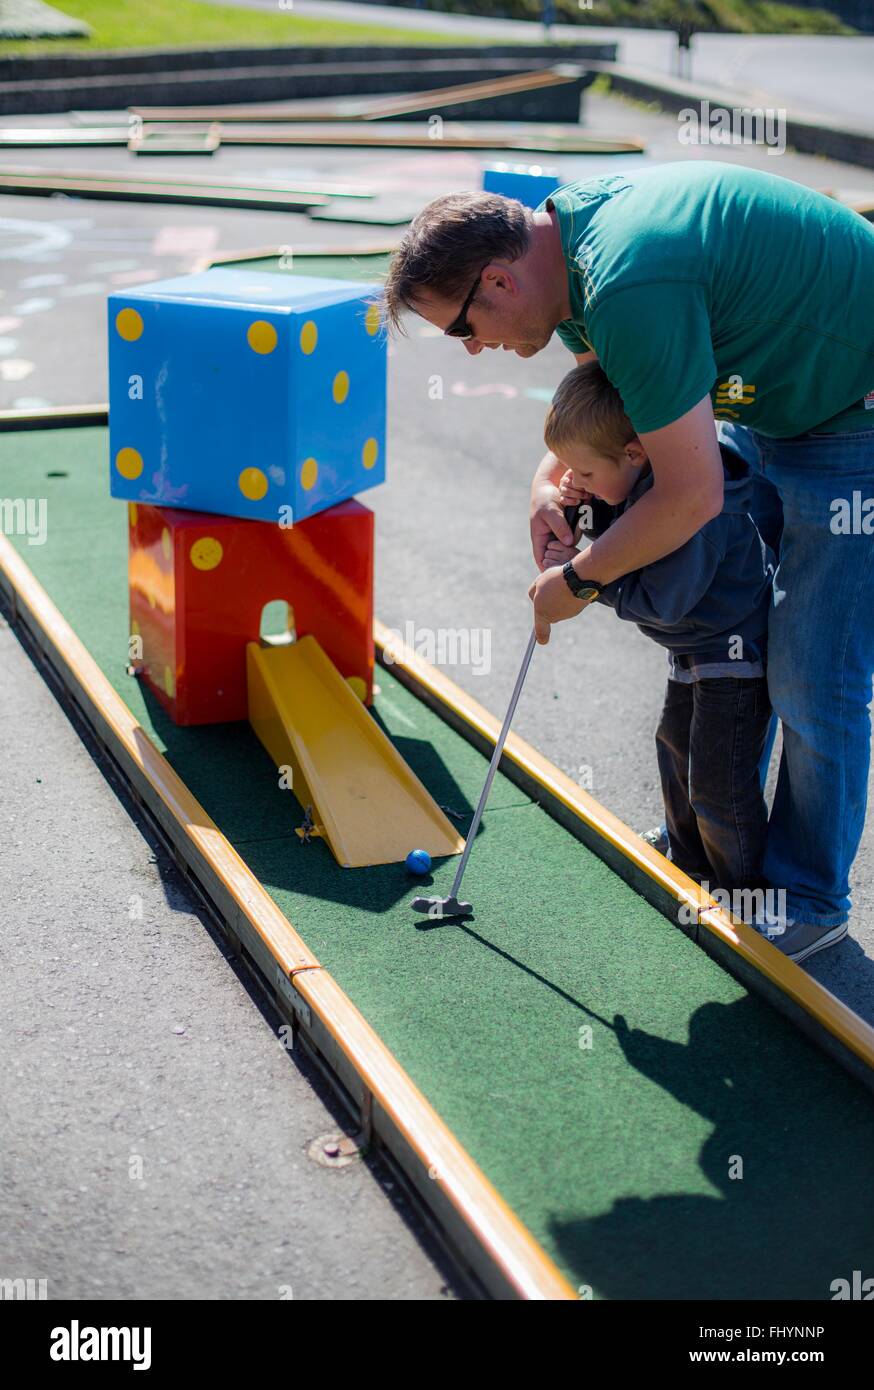 MODEL RELEASED. Father helping son to play mini golf. Stock Photo